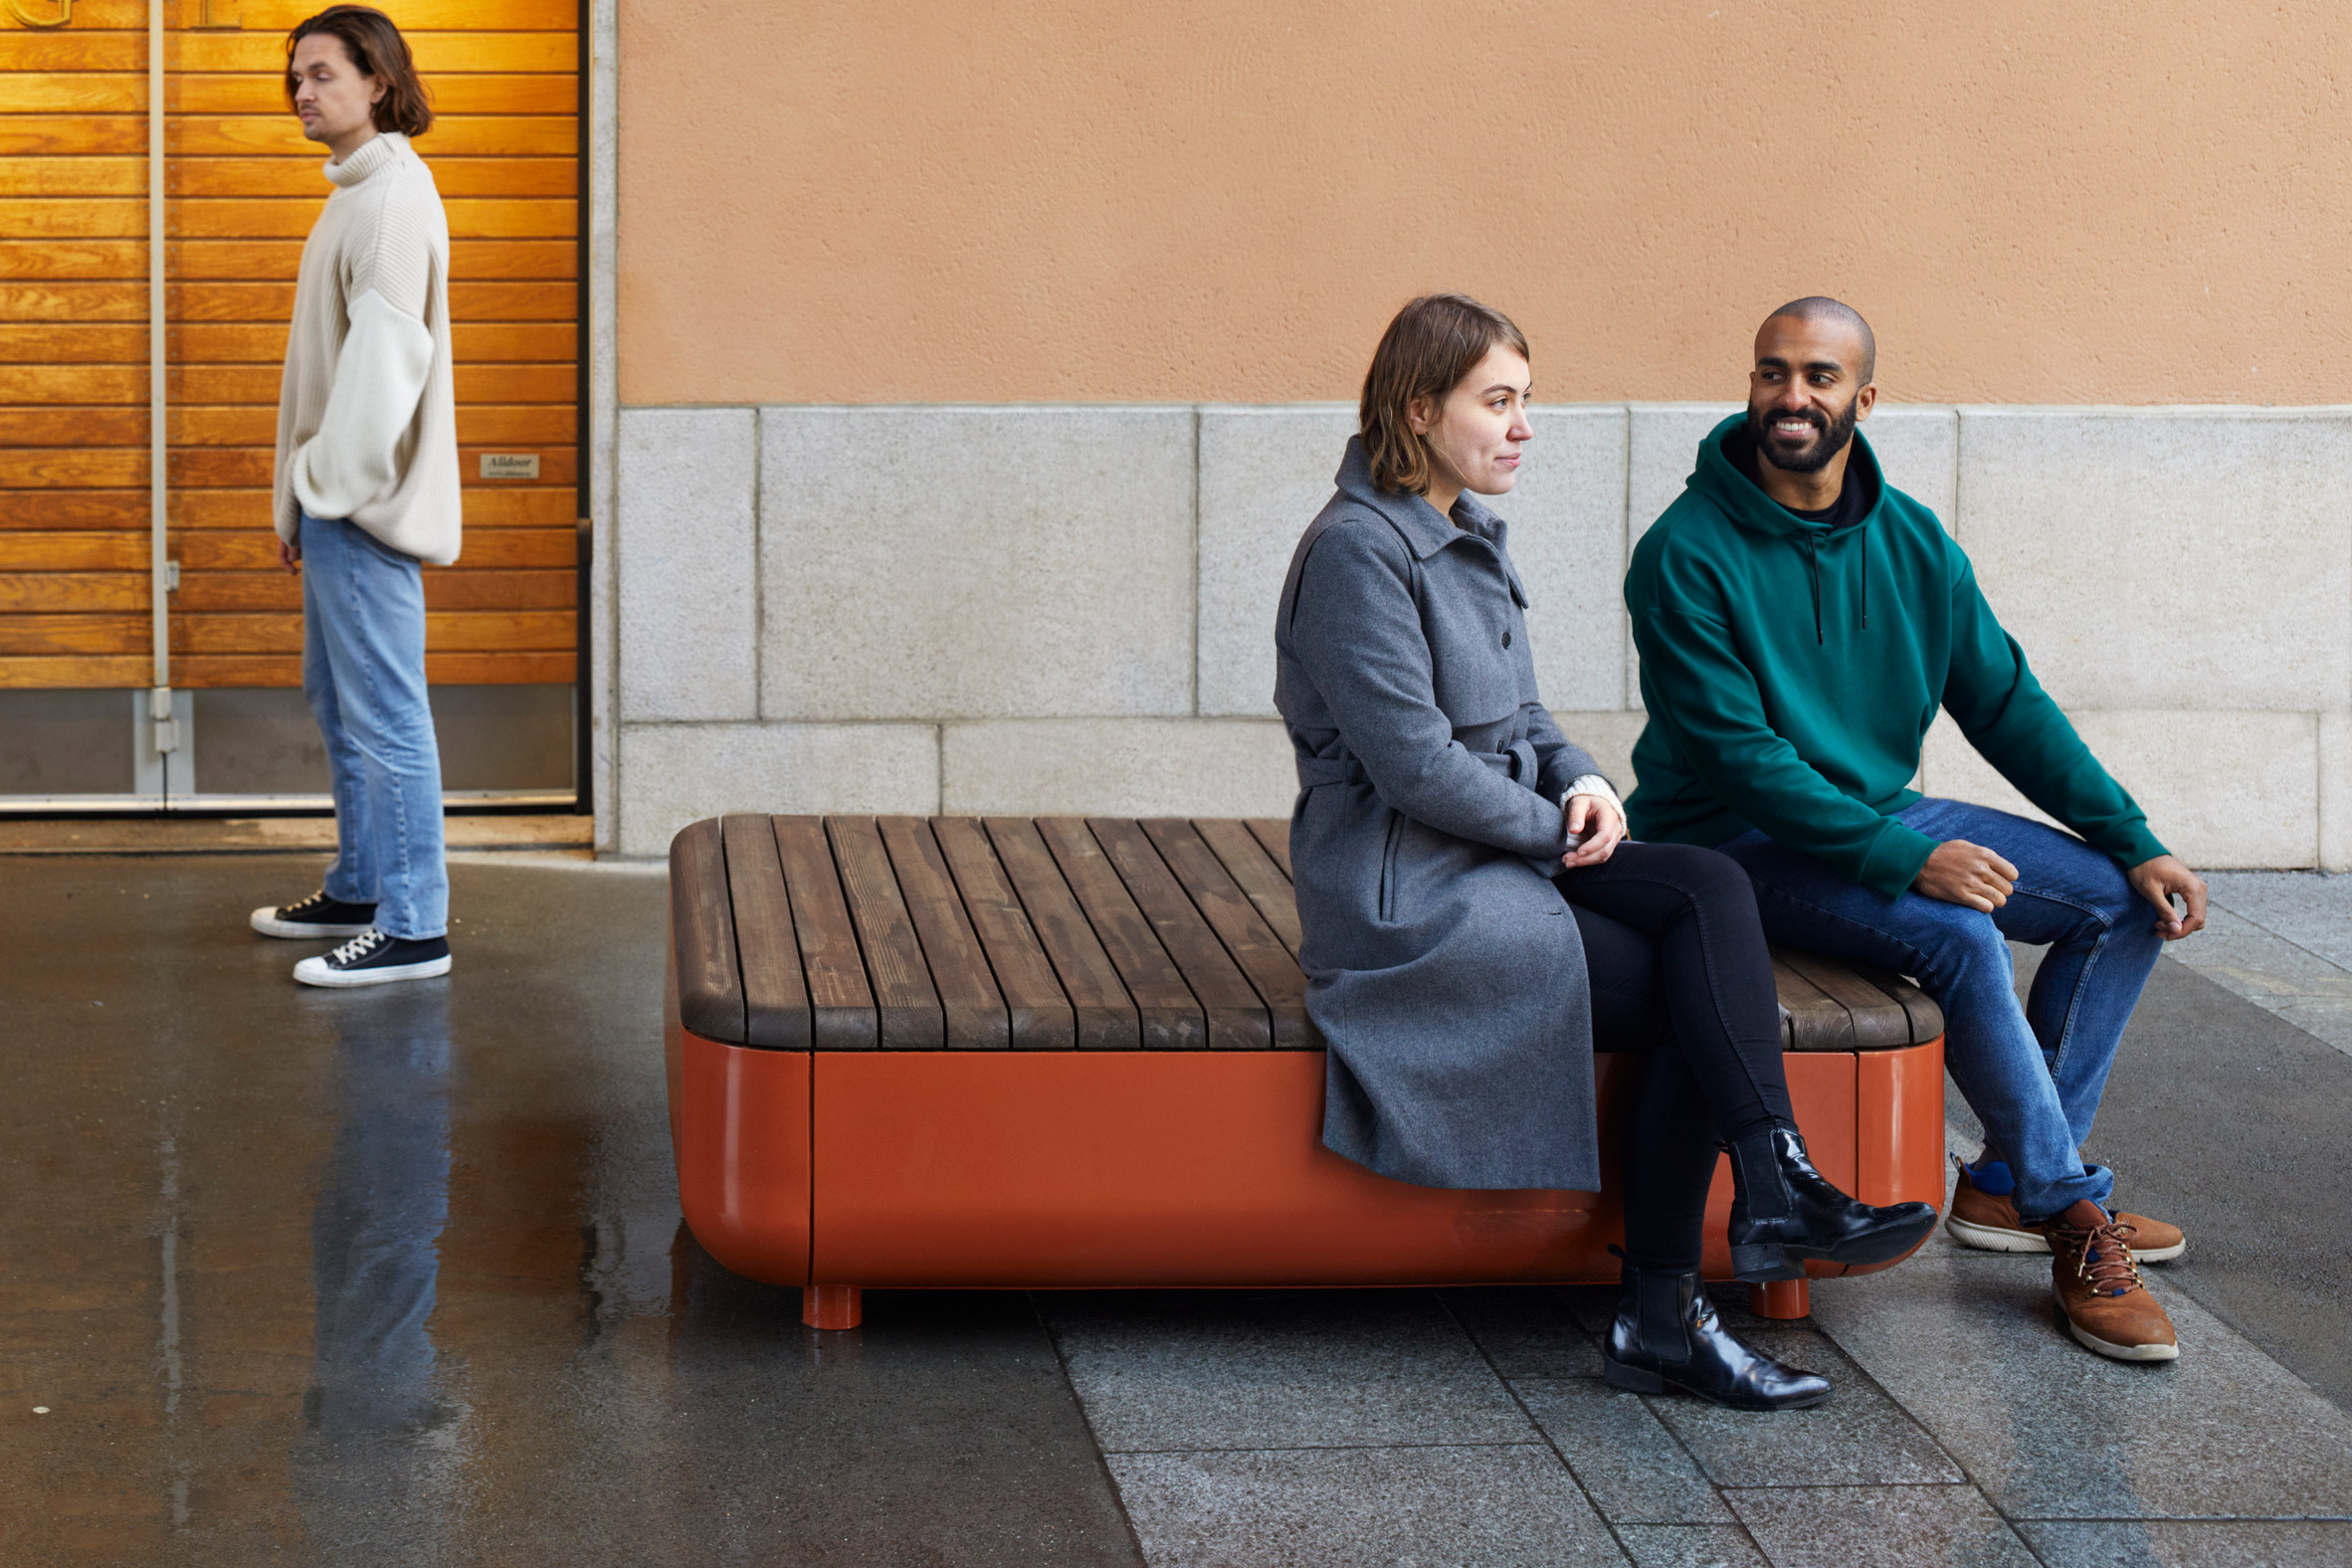 The Stones modular bench system by Vestre can be used indoors